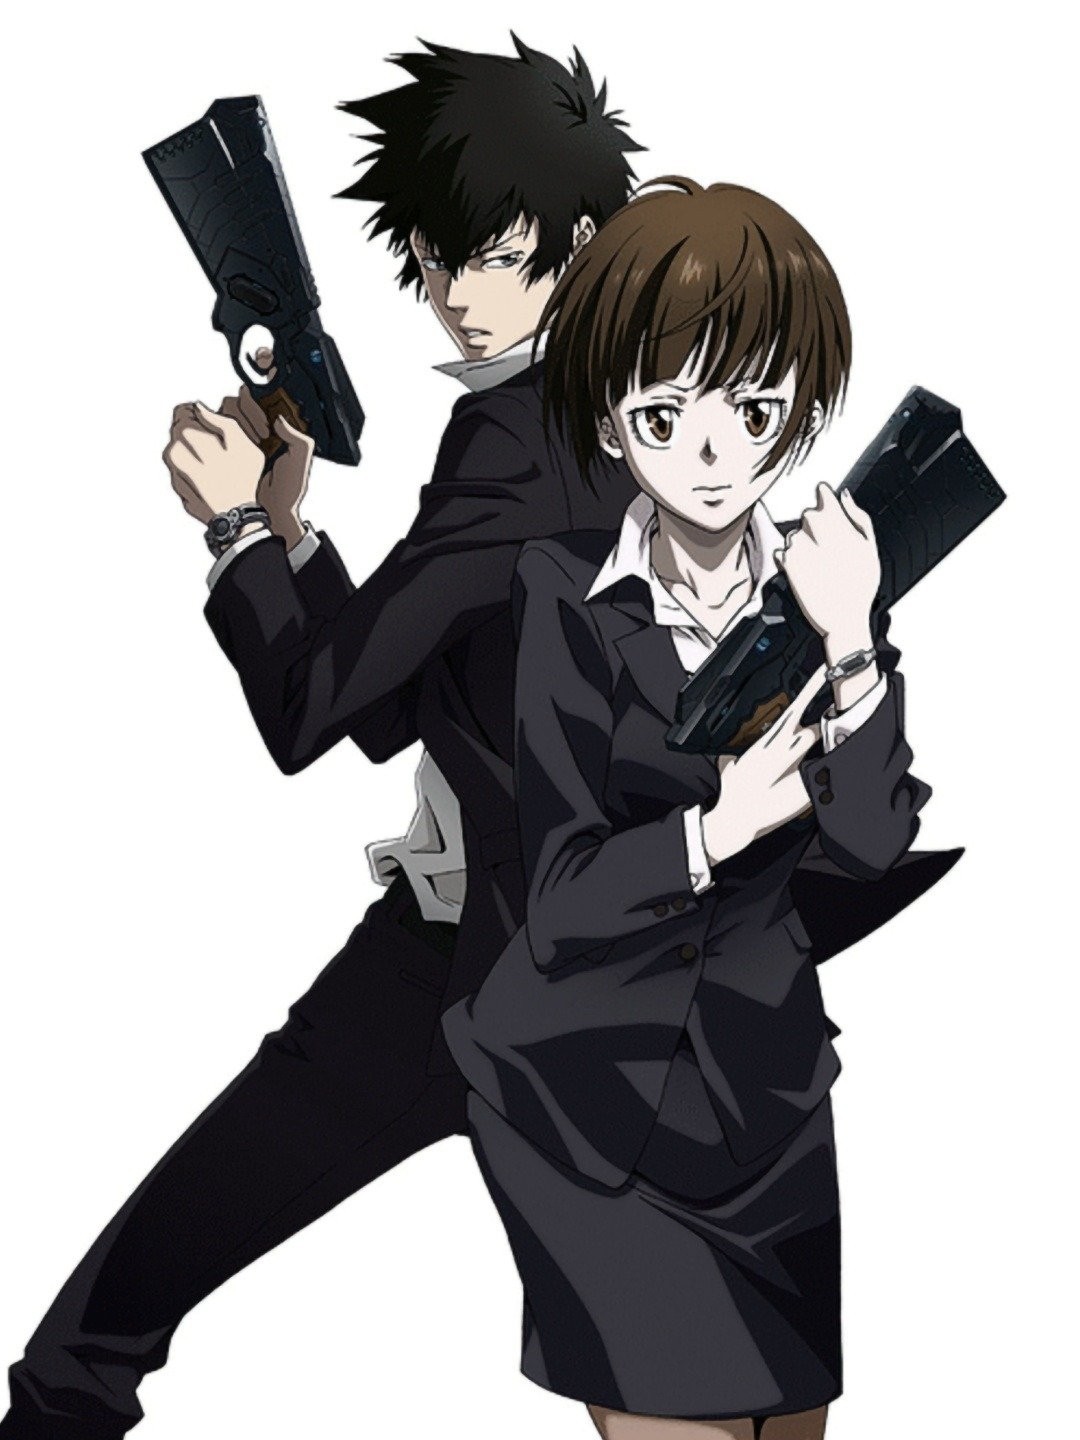 Top 10 Psycho Anime List [Best Recommendations]